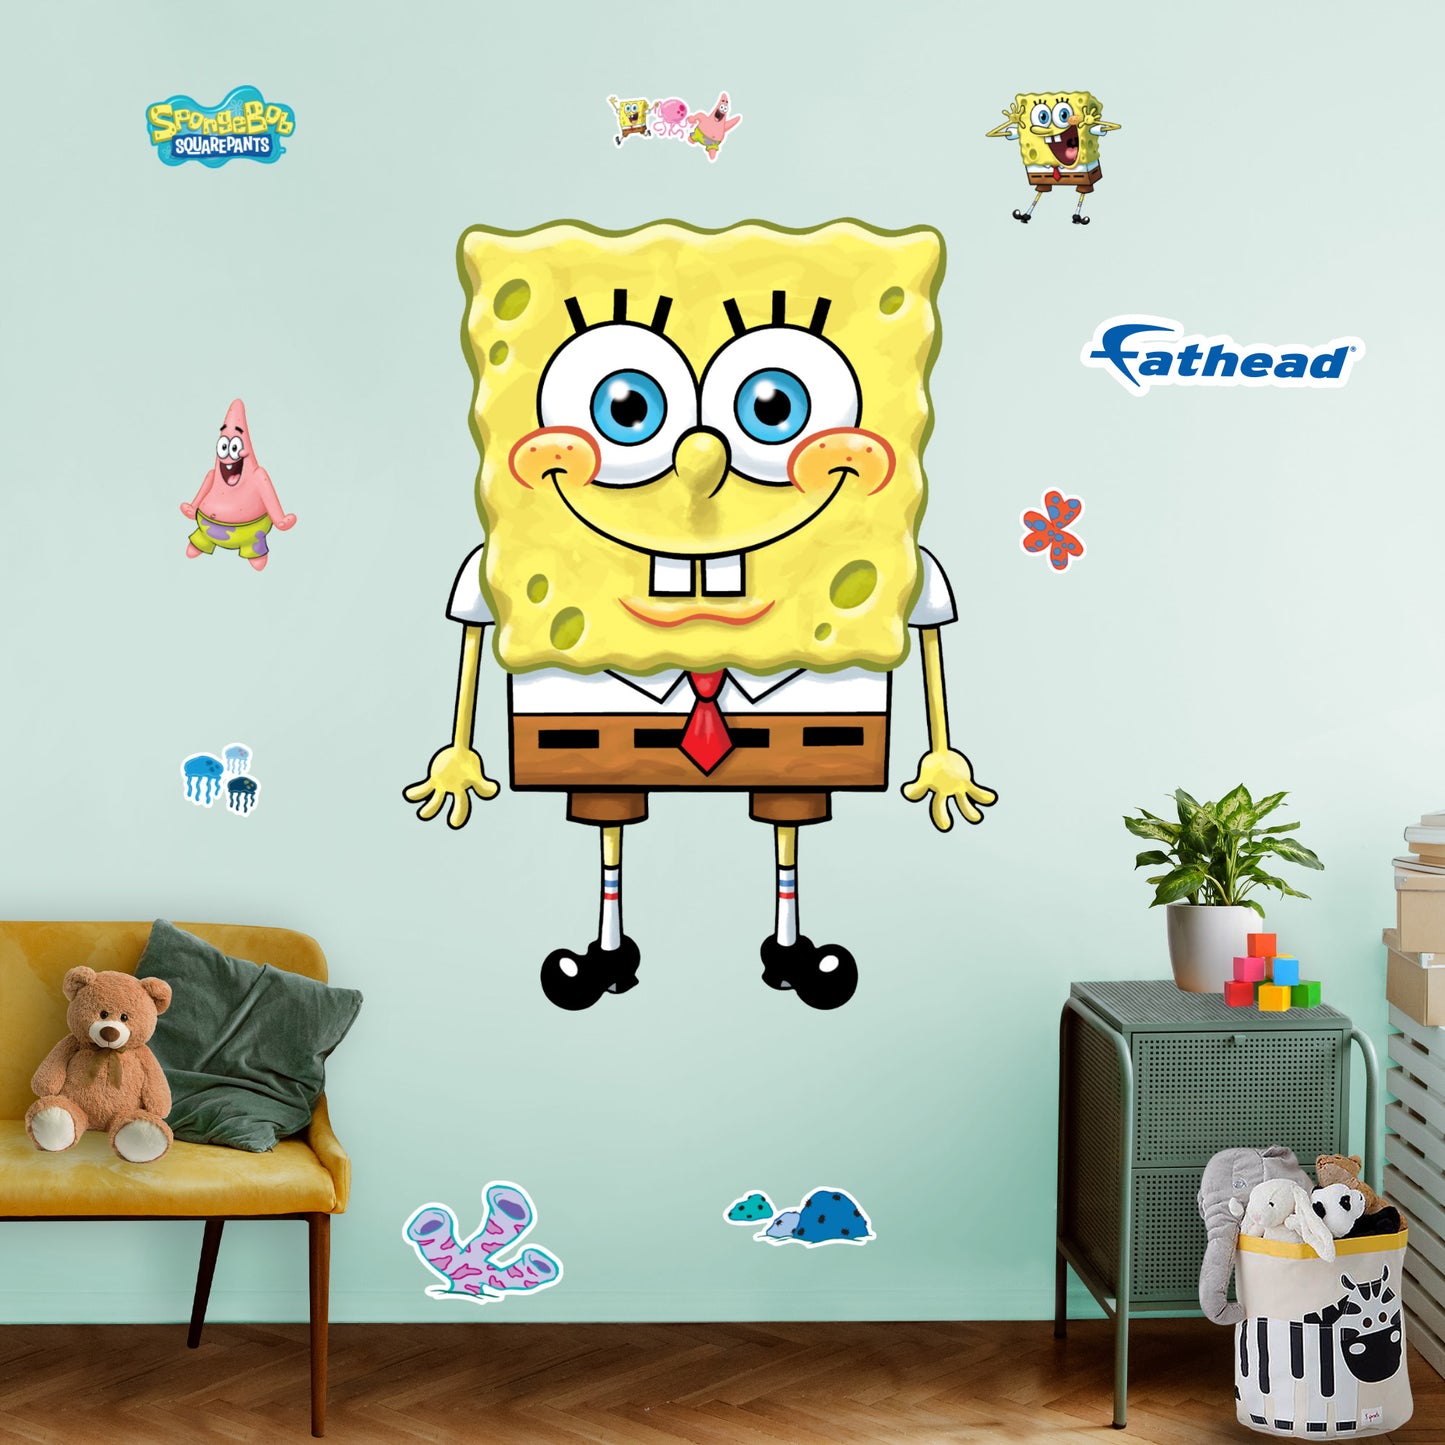 Life-Size Character +9 Decals (51"W x 68"H)